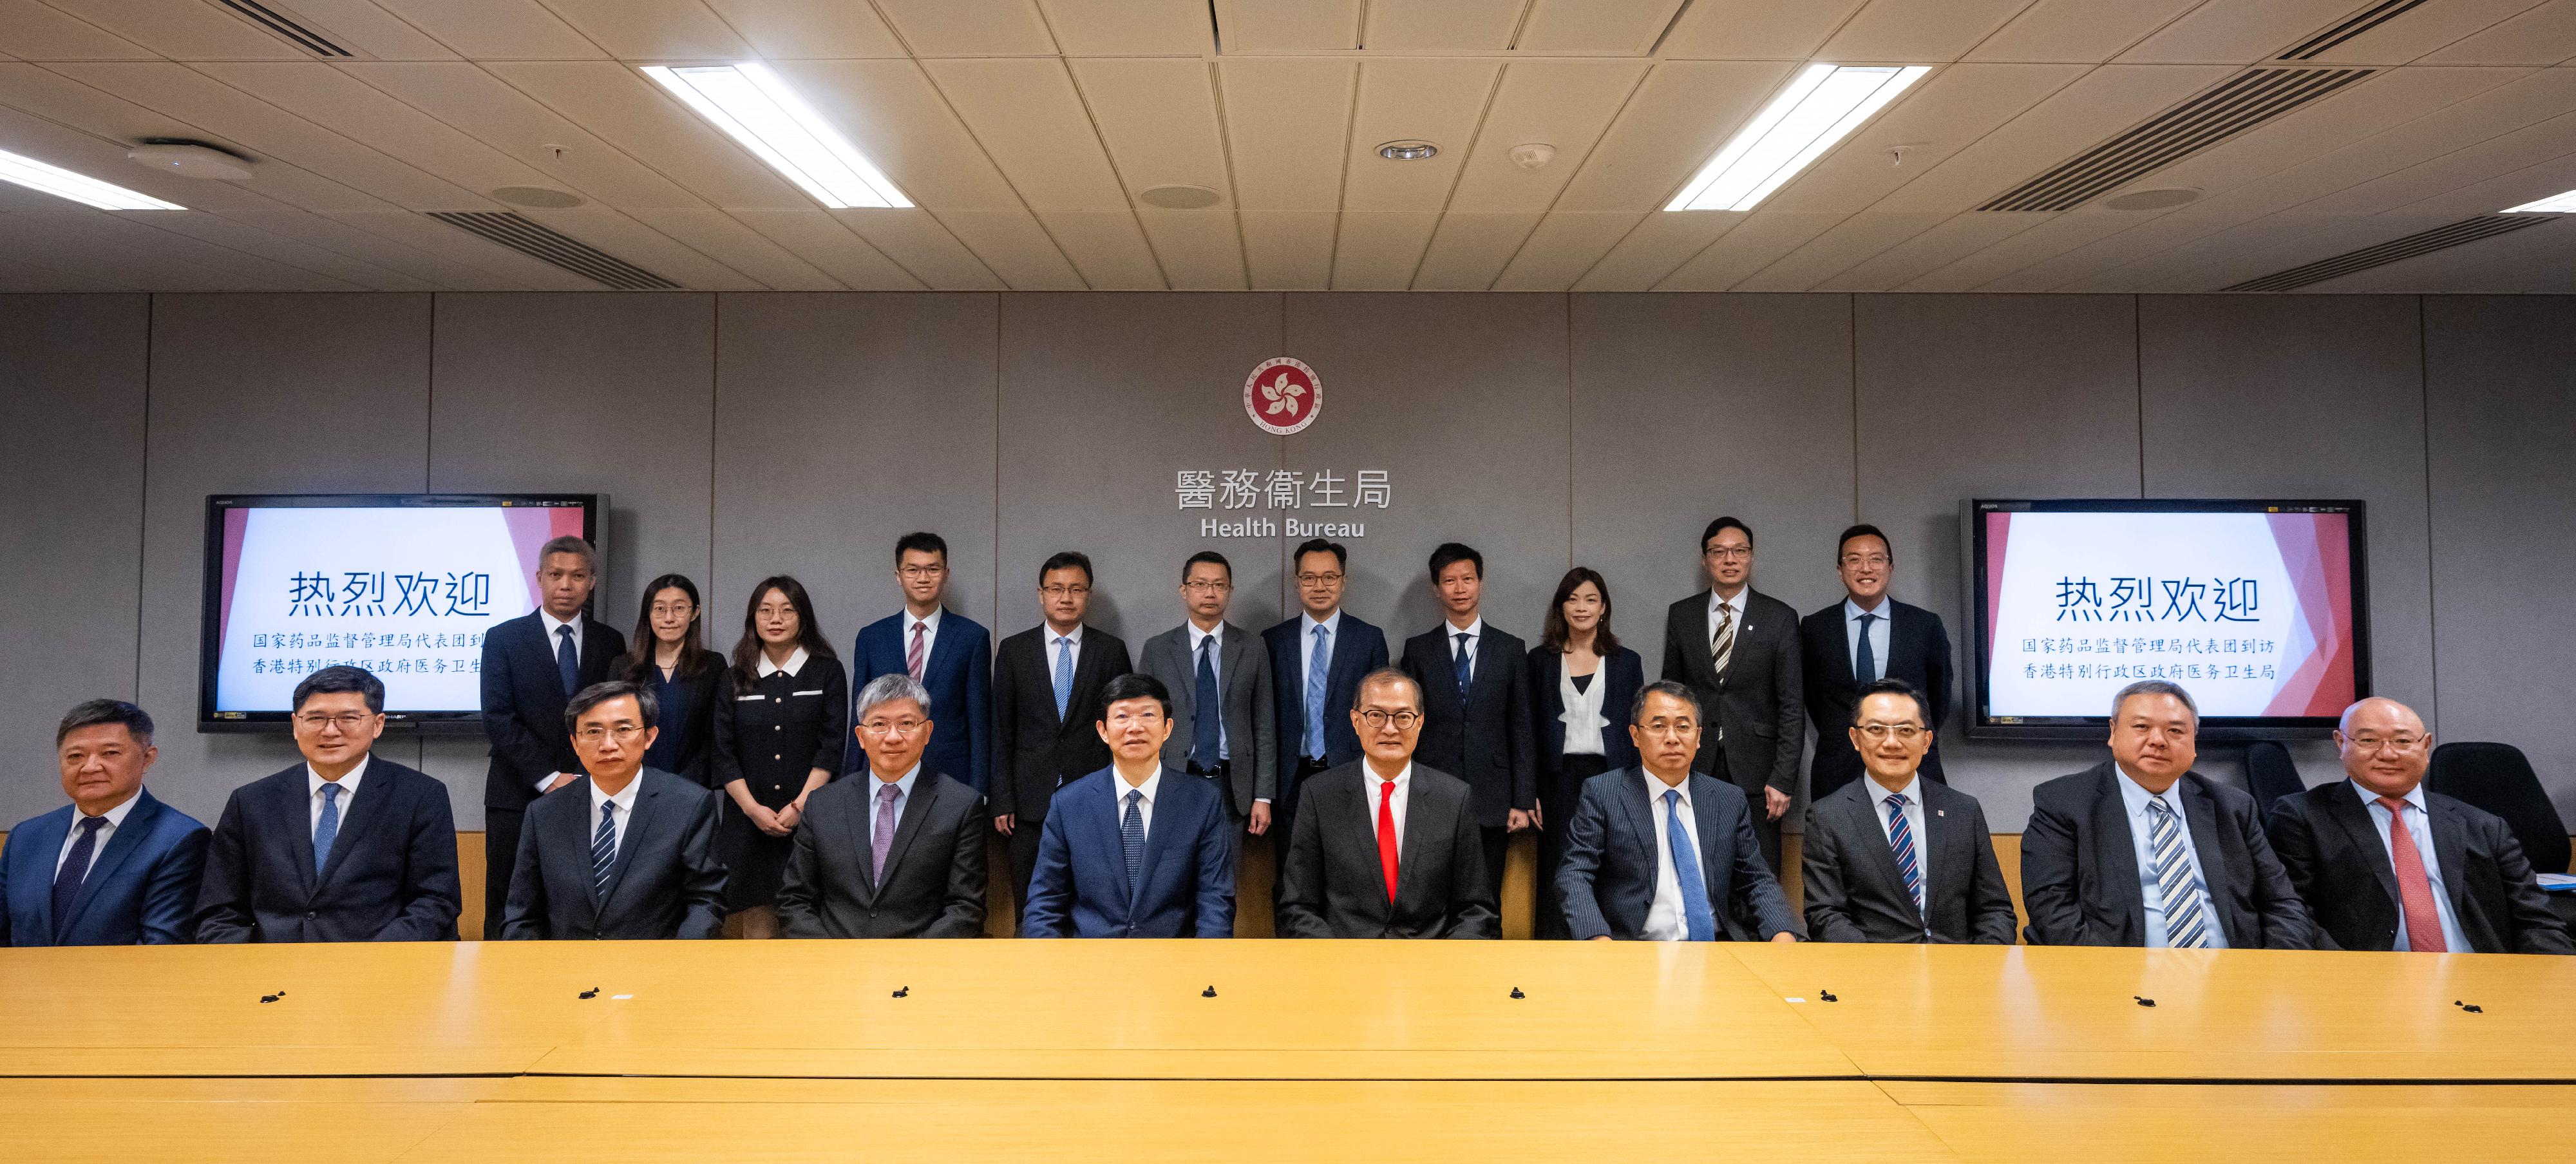 The Secretary for Health, Professor Lo Chung-mau, meets with a delegation led by the Commissioner of the National Medical Products Administration, Mr Li Li, today (May 8). Photo shows Professor Lo (front row, fifth right); Mr Li (front row, fifth left); the Permanent Secretary for Health, Mr Thomas Chan (front row, fourth left); the Director of Health, Dr Ronald Lam (front row, third right); the Chief Executive of the Hospital Authority, Dr Tony Ko (front row, second left), and other attendees of the meeting.